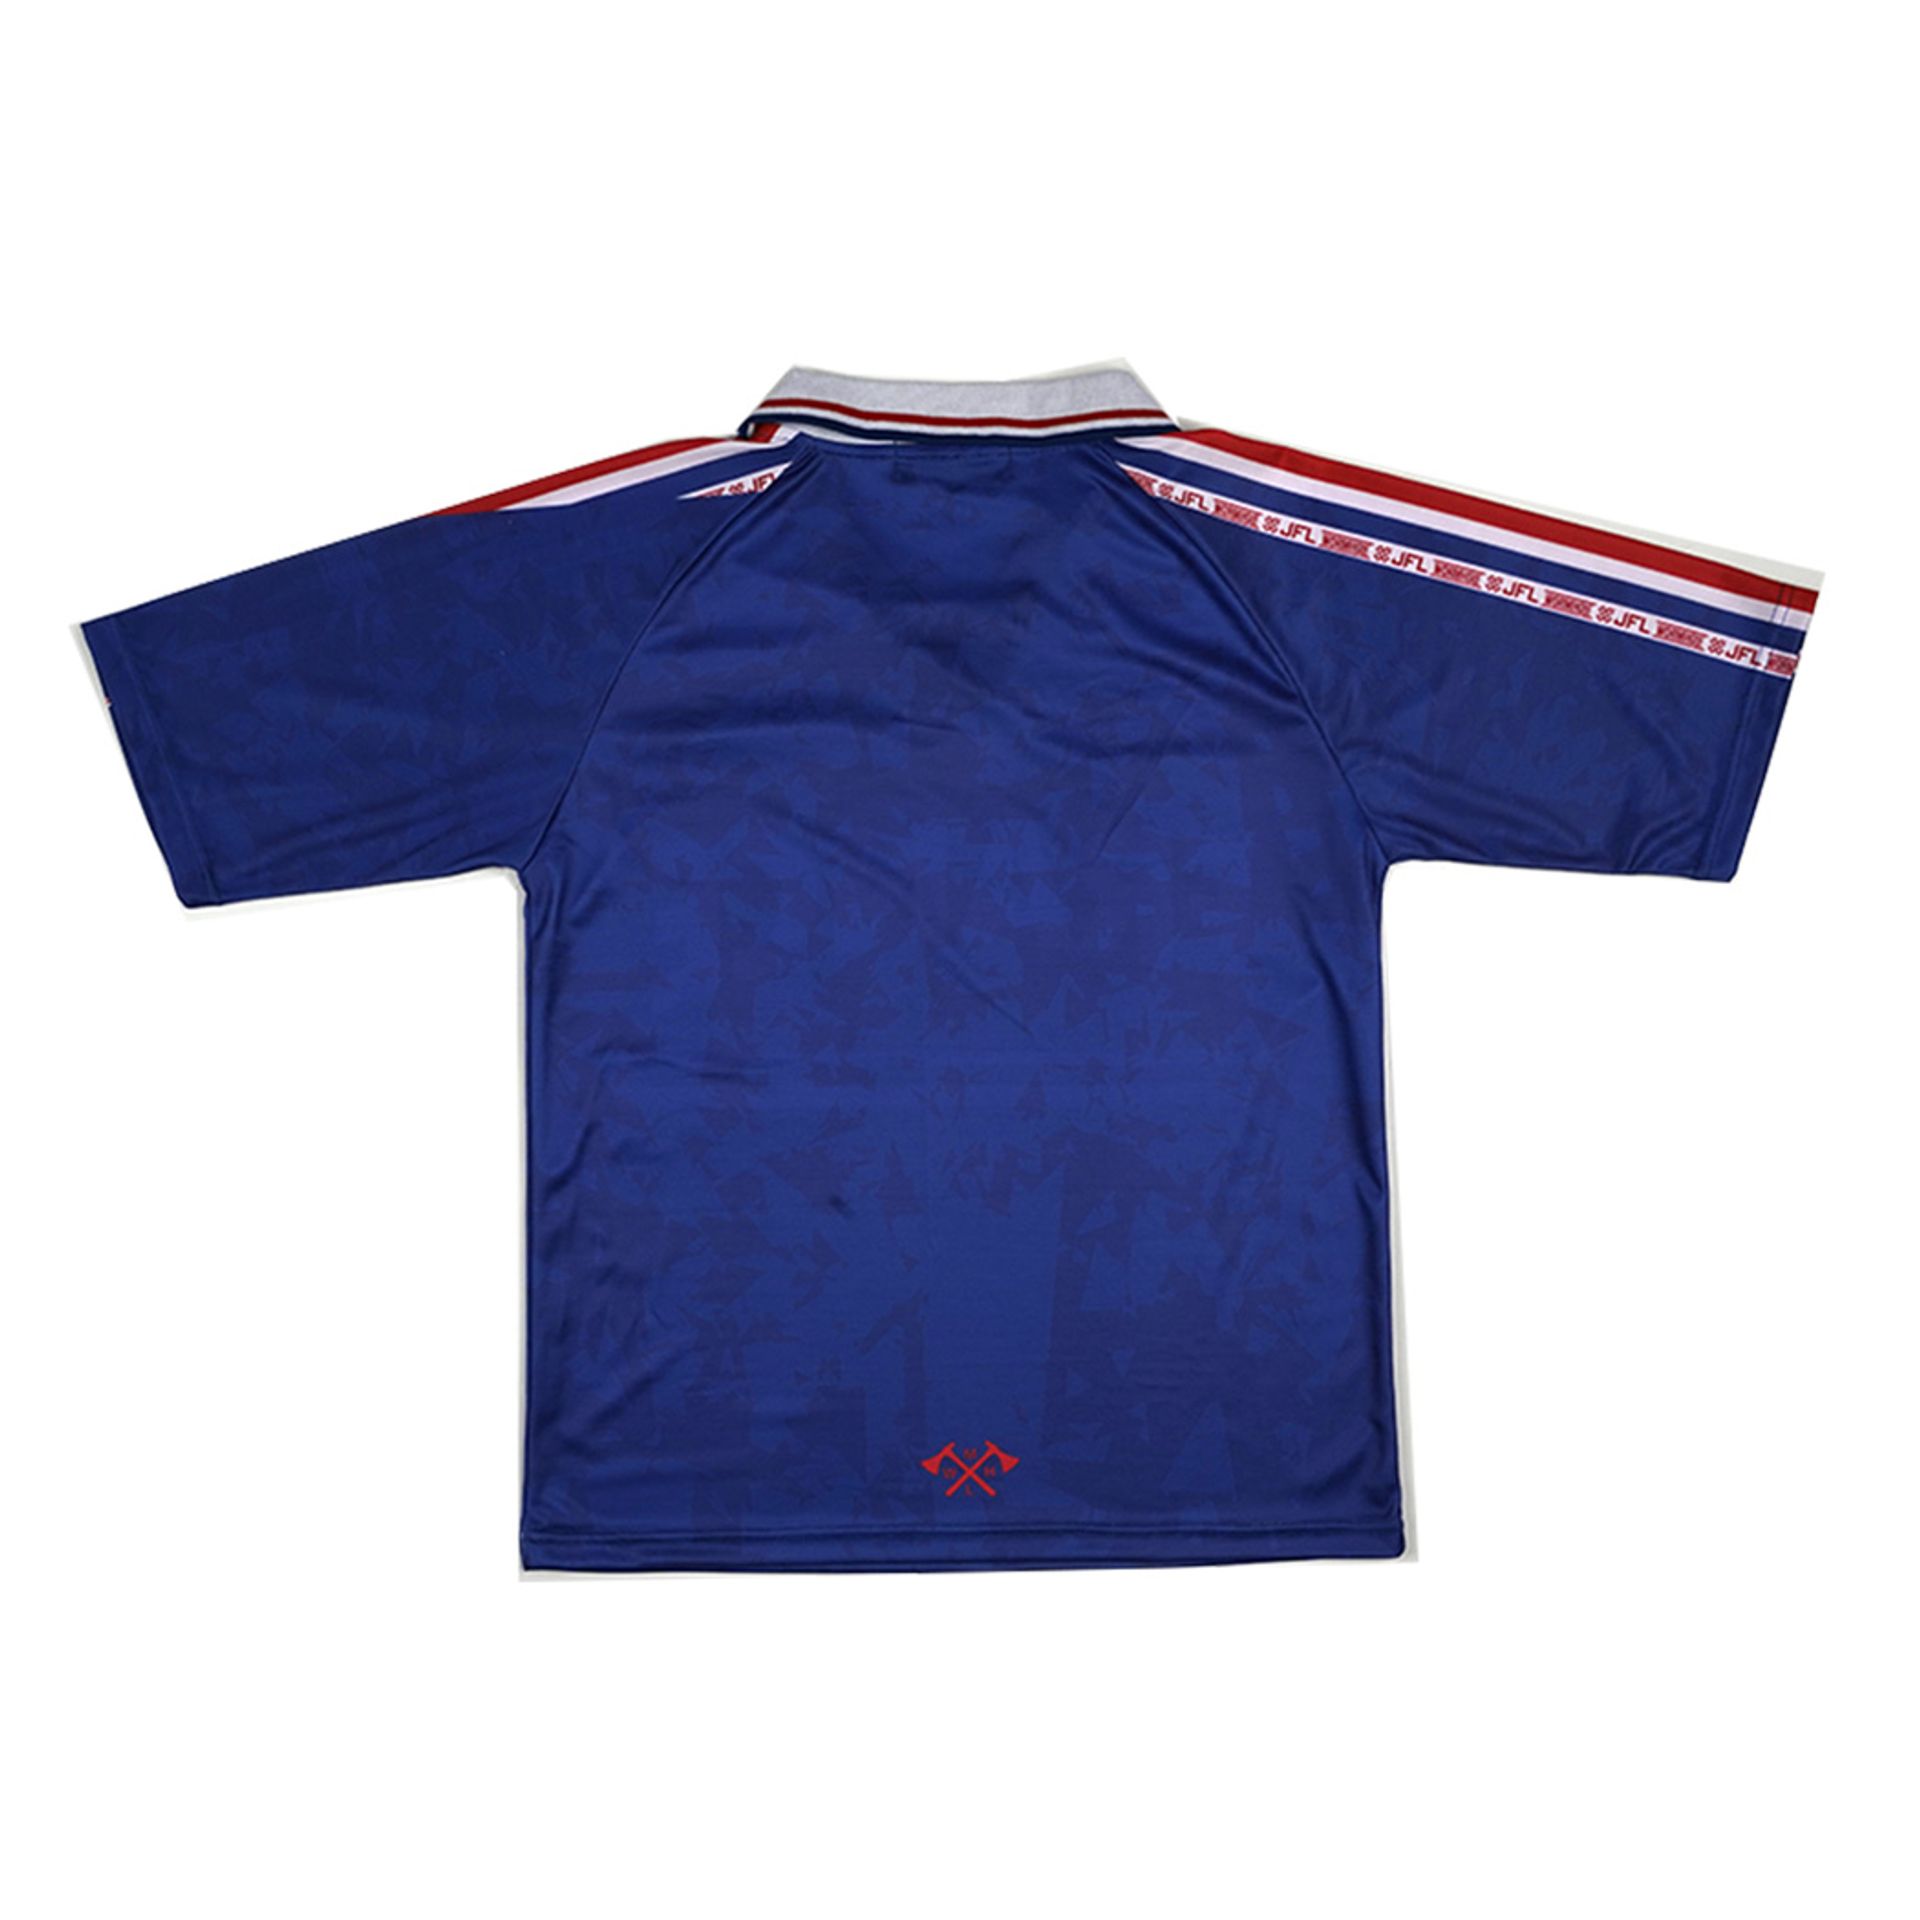 Wormhole Mondial France Home Vintage Jersey